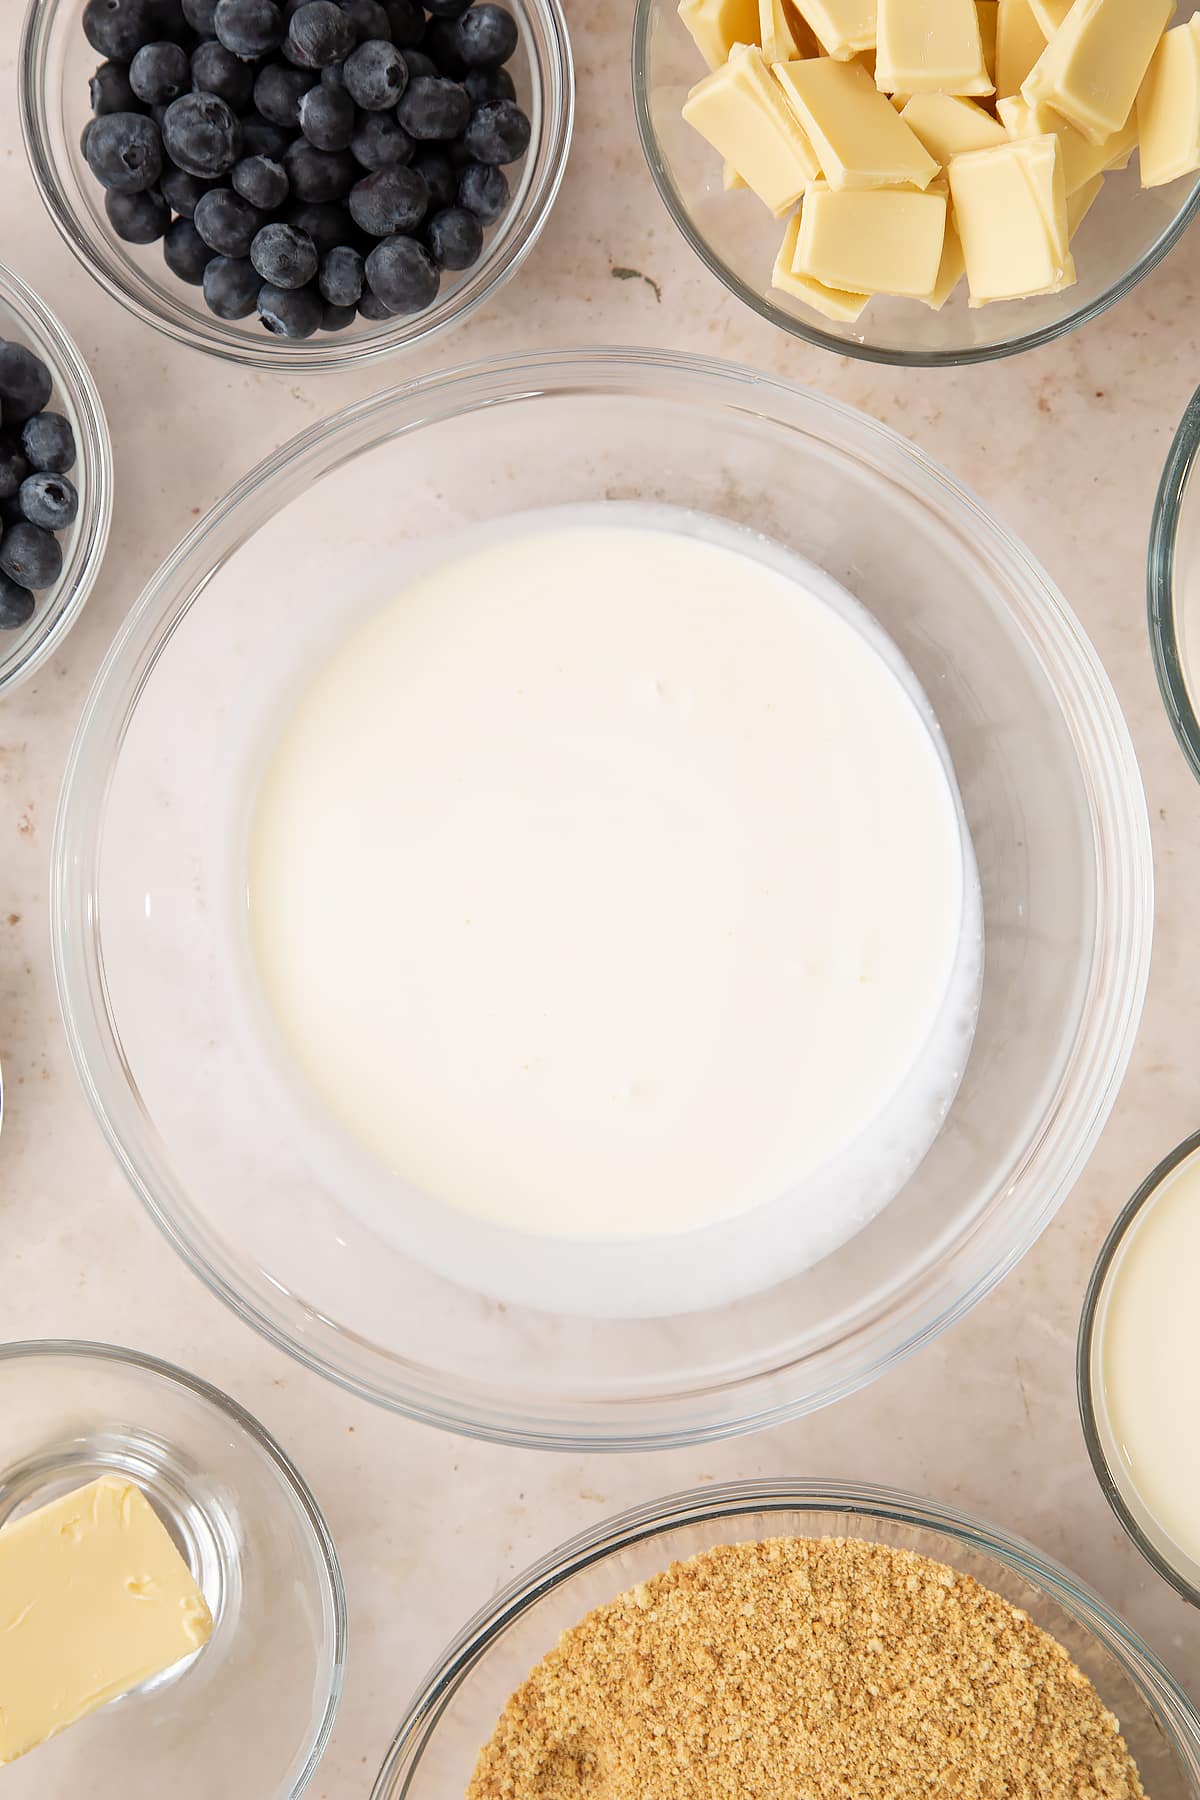 Cream in a bowl. Ingredients to make blueberry cheesecake pie surround the bowl.